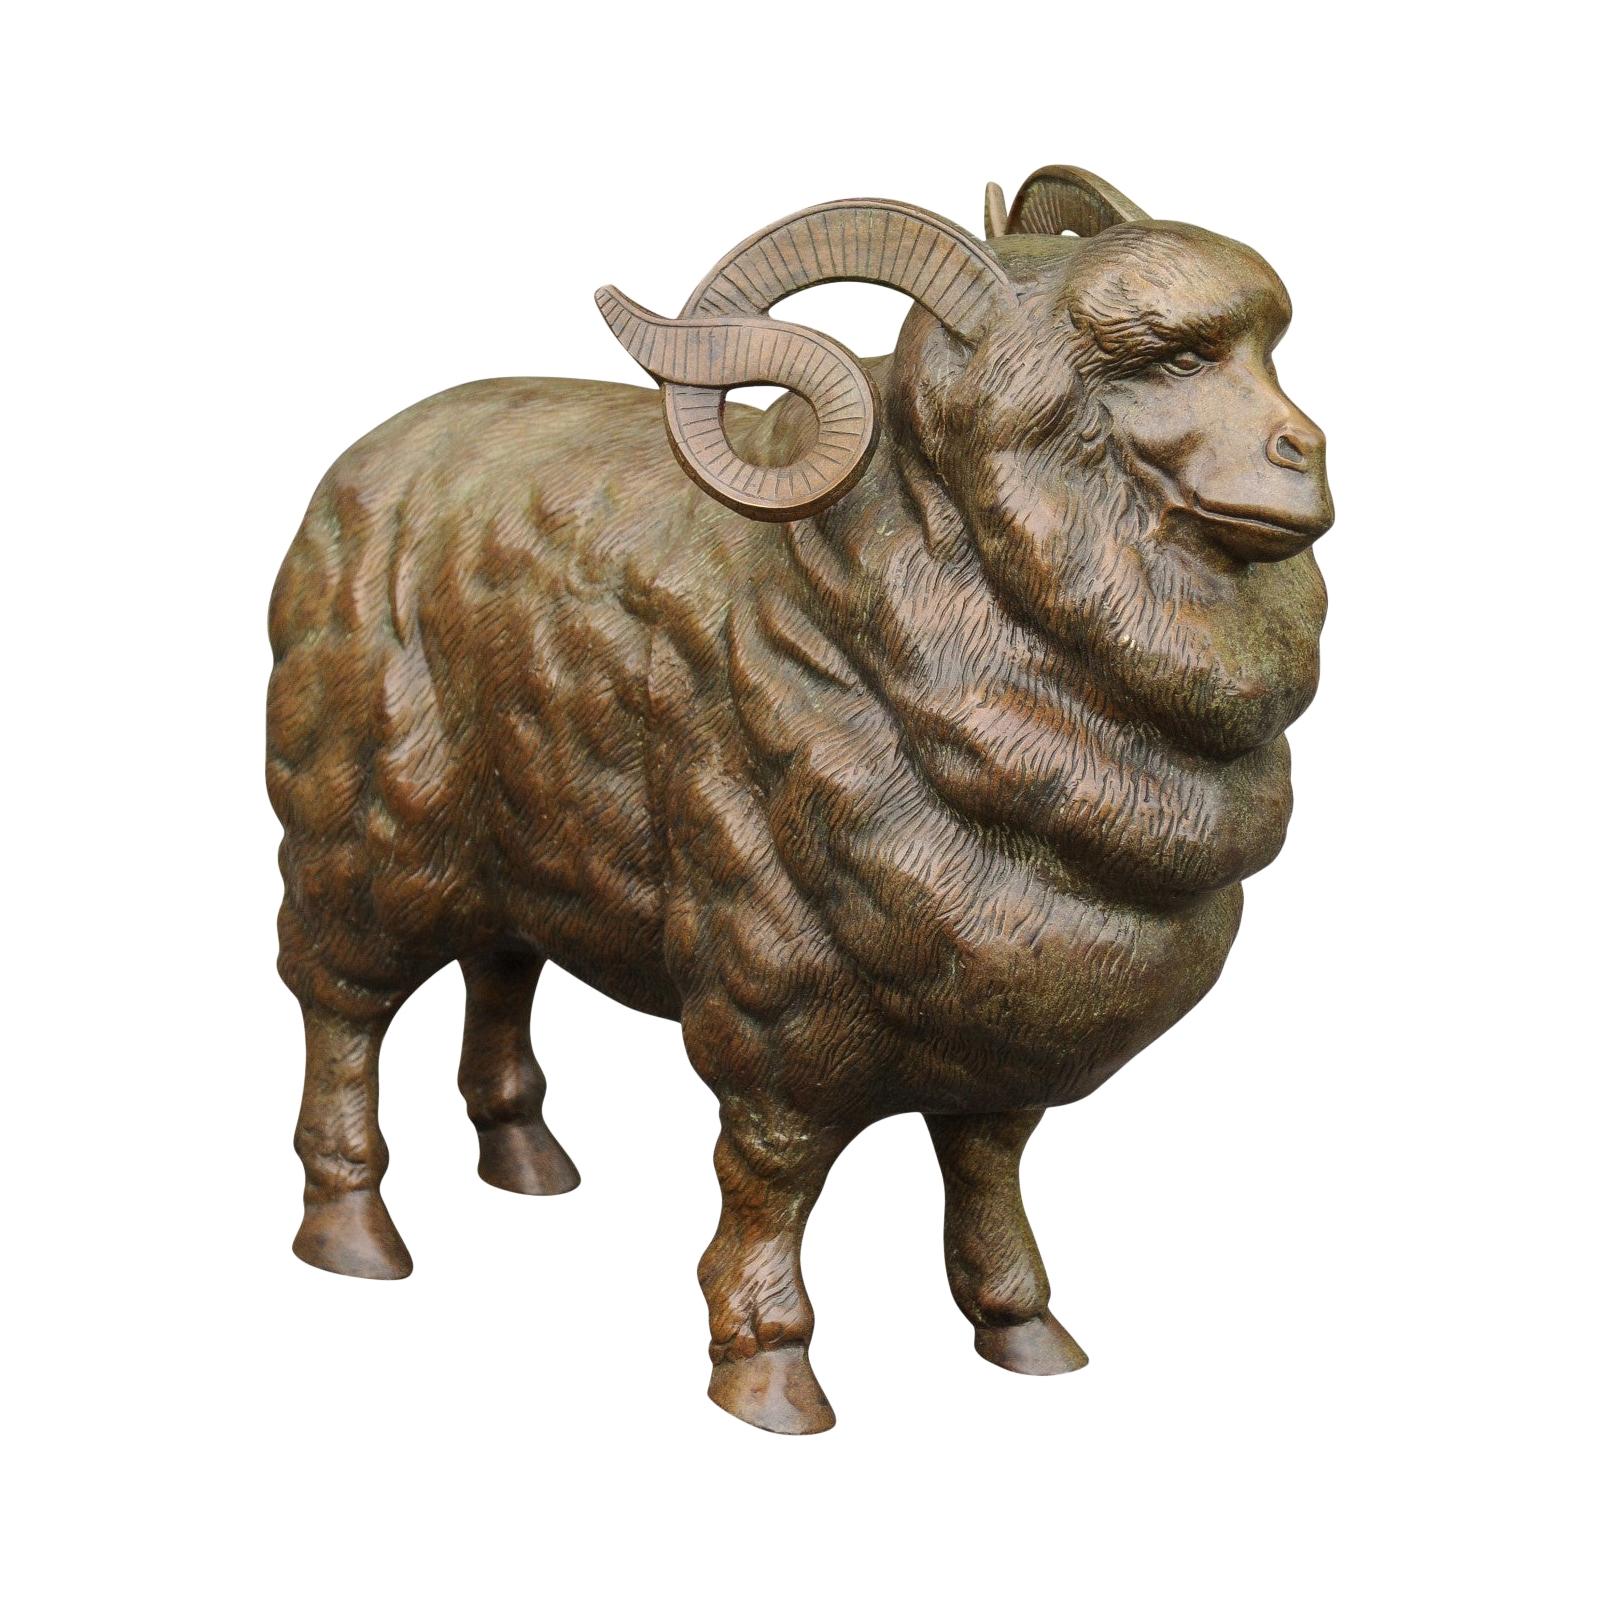 French Vintage Bronze Ram Sculpture from the Midcentury, with Large Horns